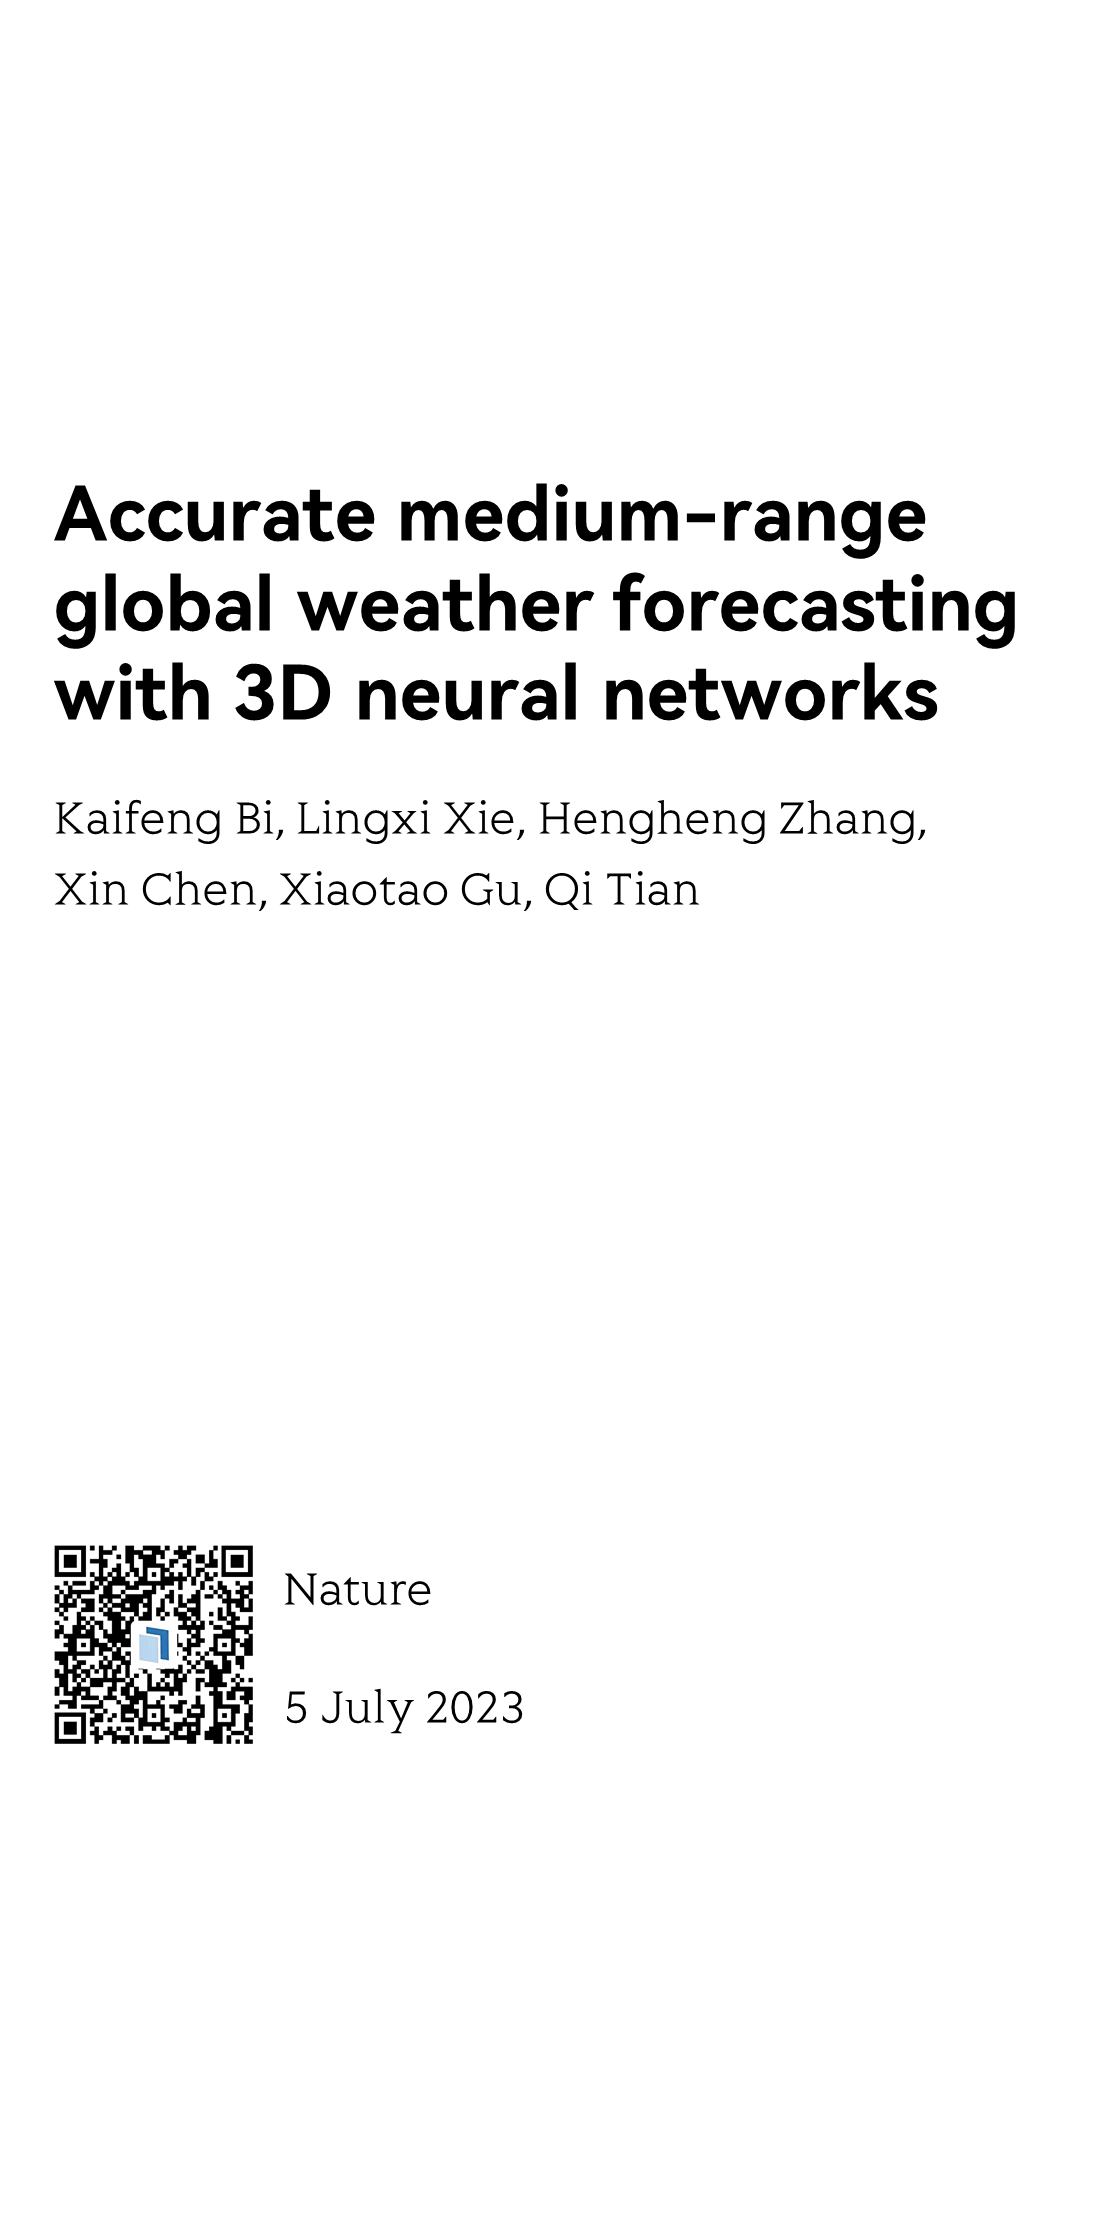 Accurate medium-range global weather forecasting with 3D neural networks_1